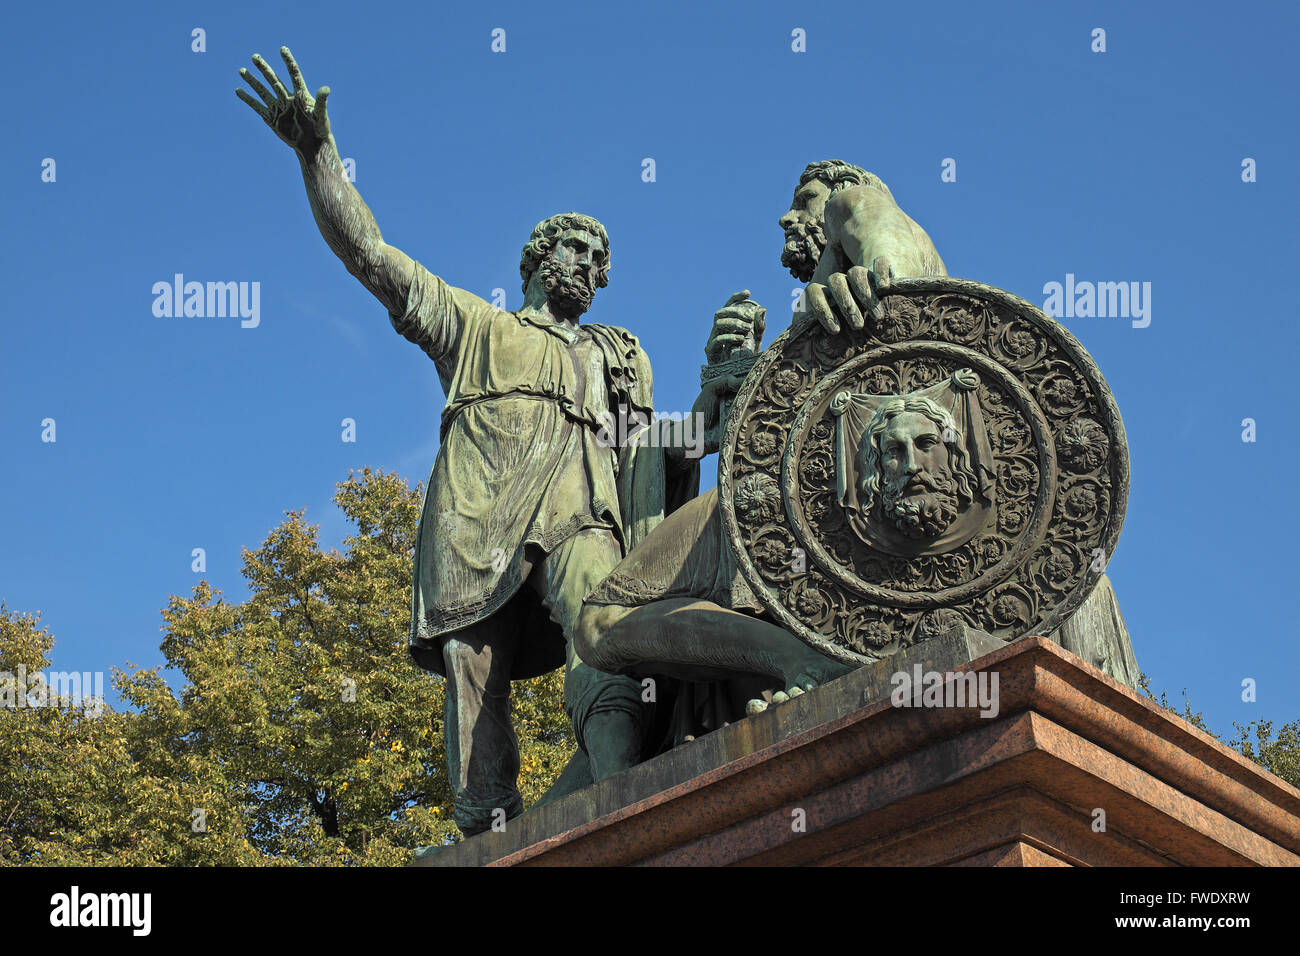 Statue of butcher Kuzma Mimin and Prince Dimitry Pozharsky, Red Square, Moscow, Russia. Stock Photo